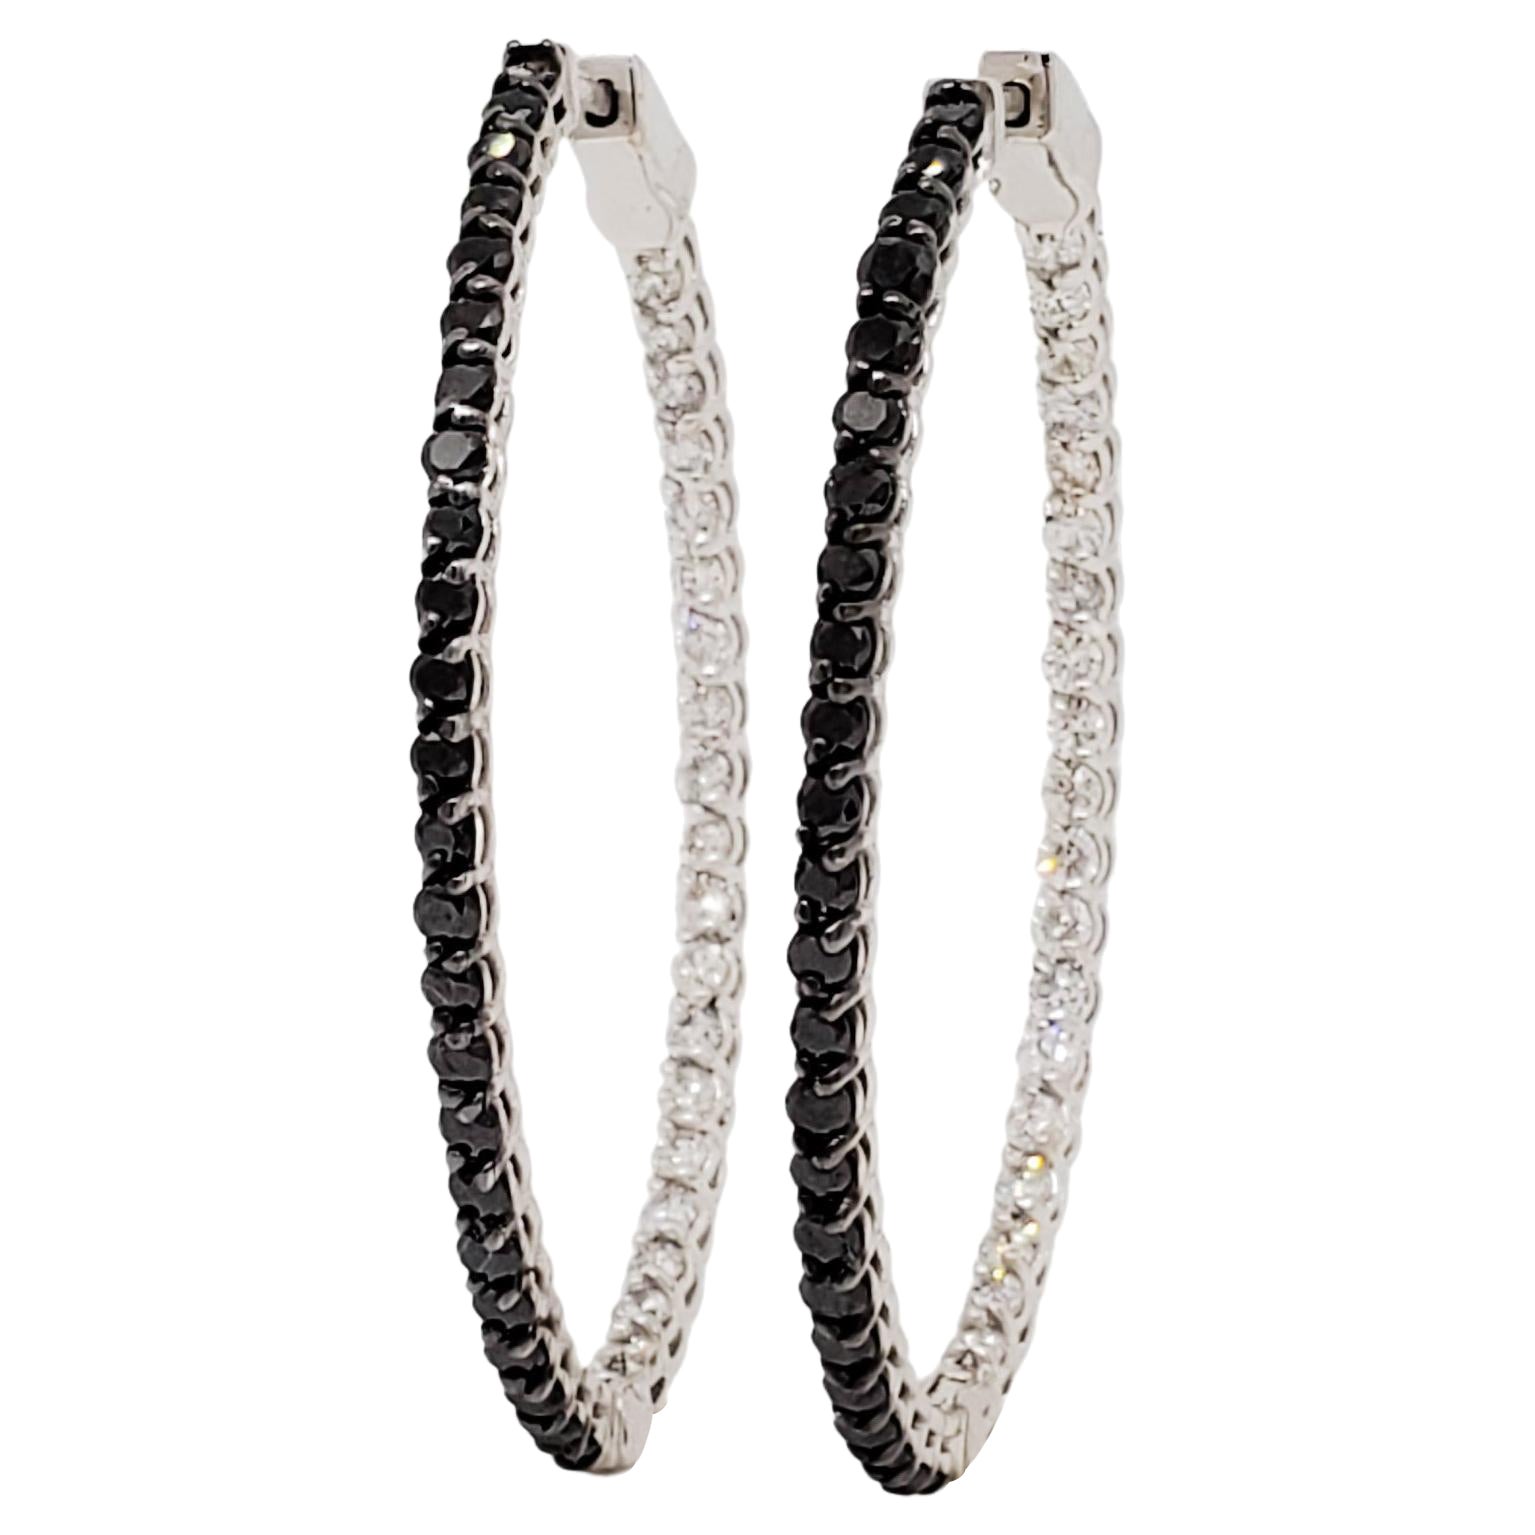  Black and White Diamond Oval Shape Hoops in 14k White Gold